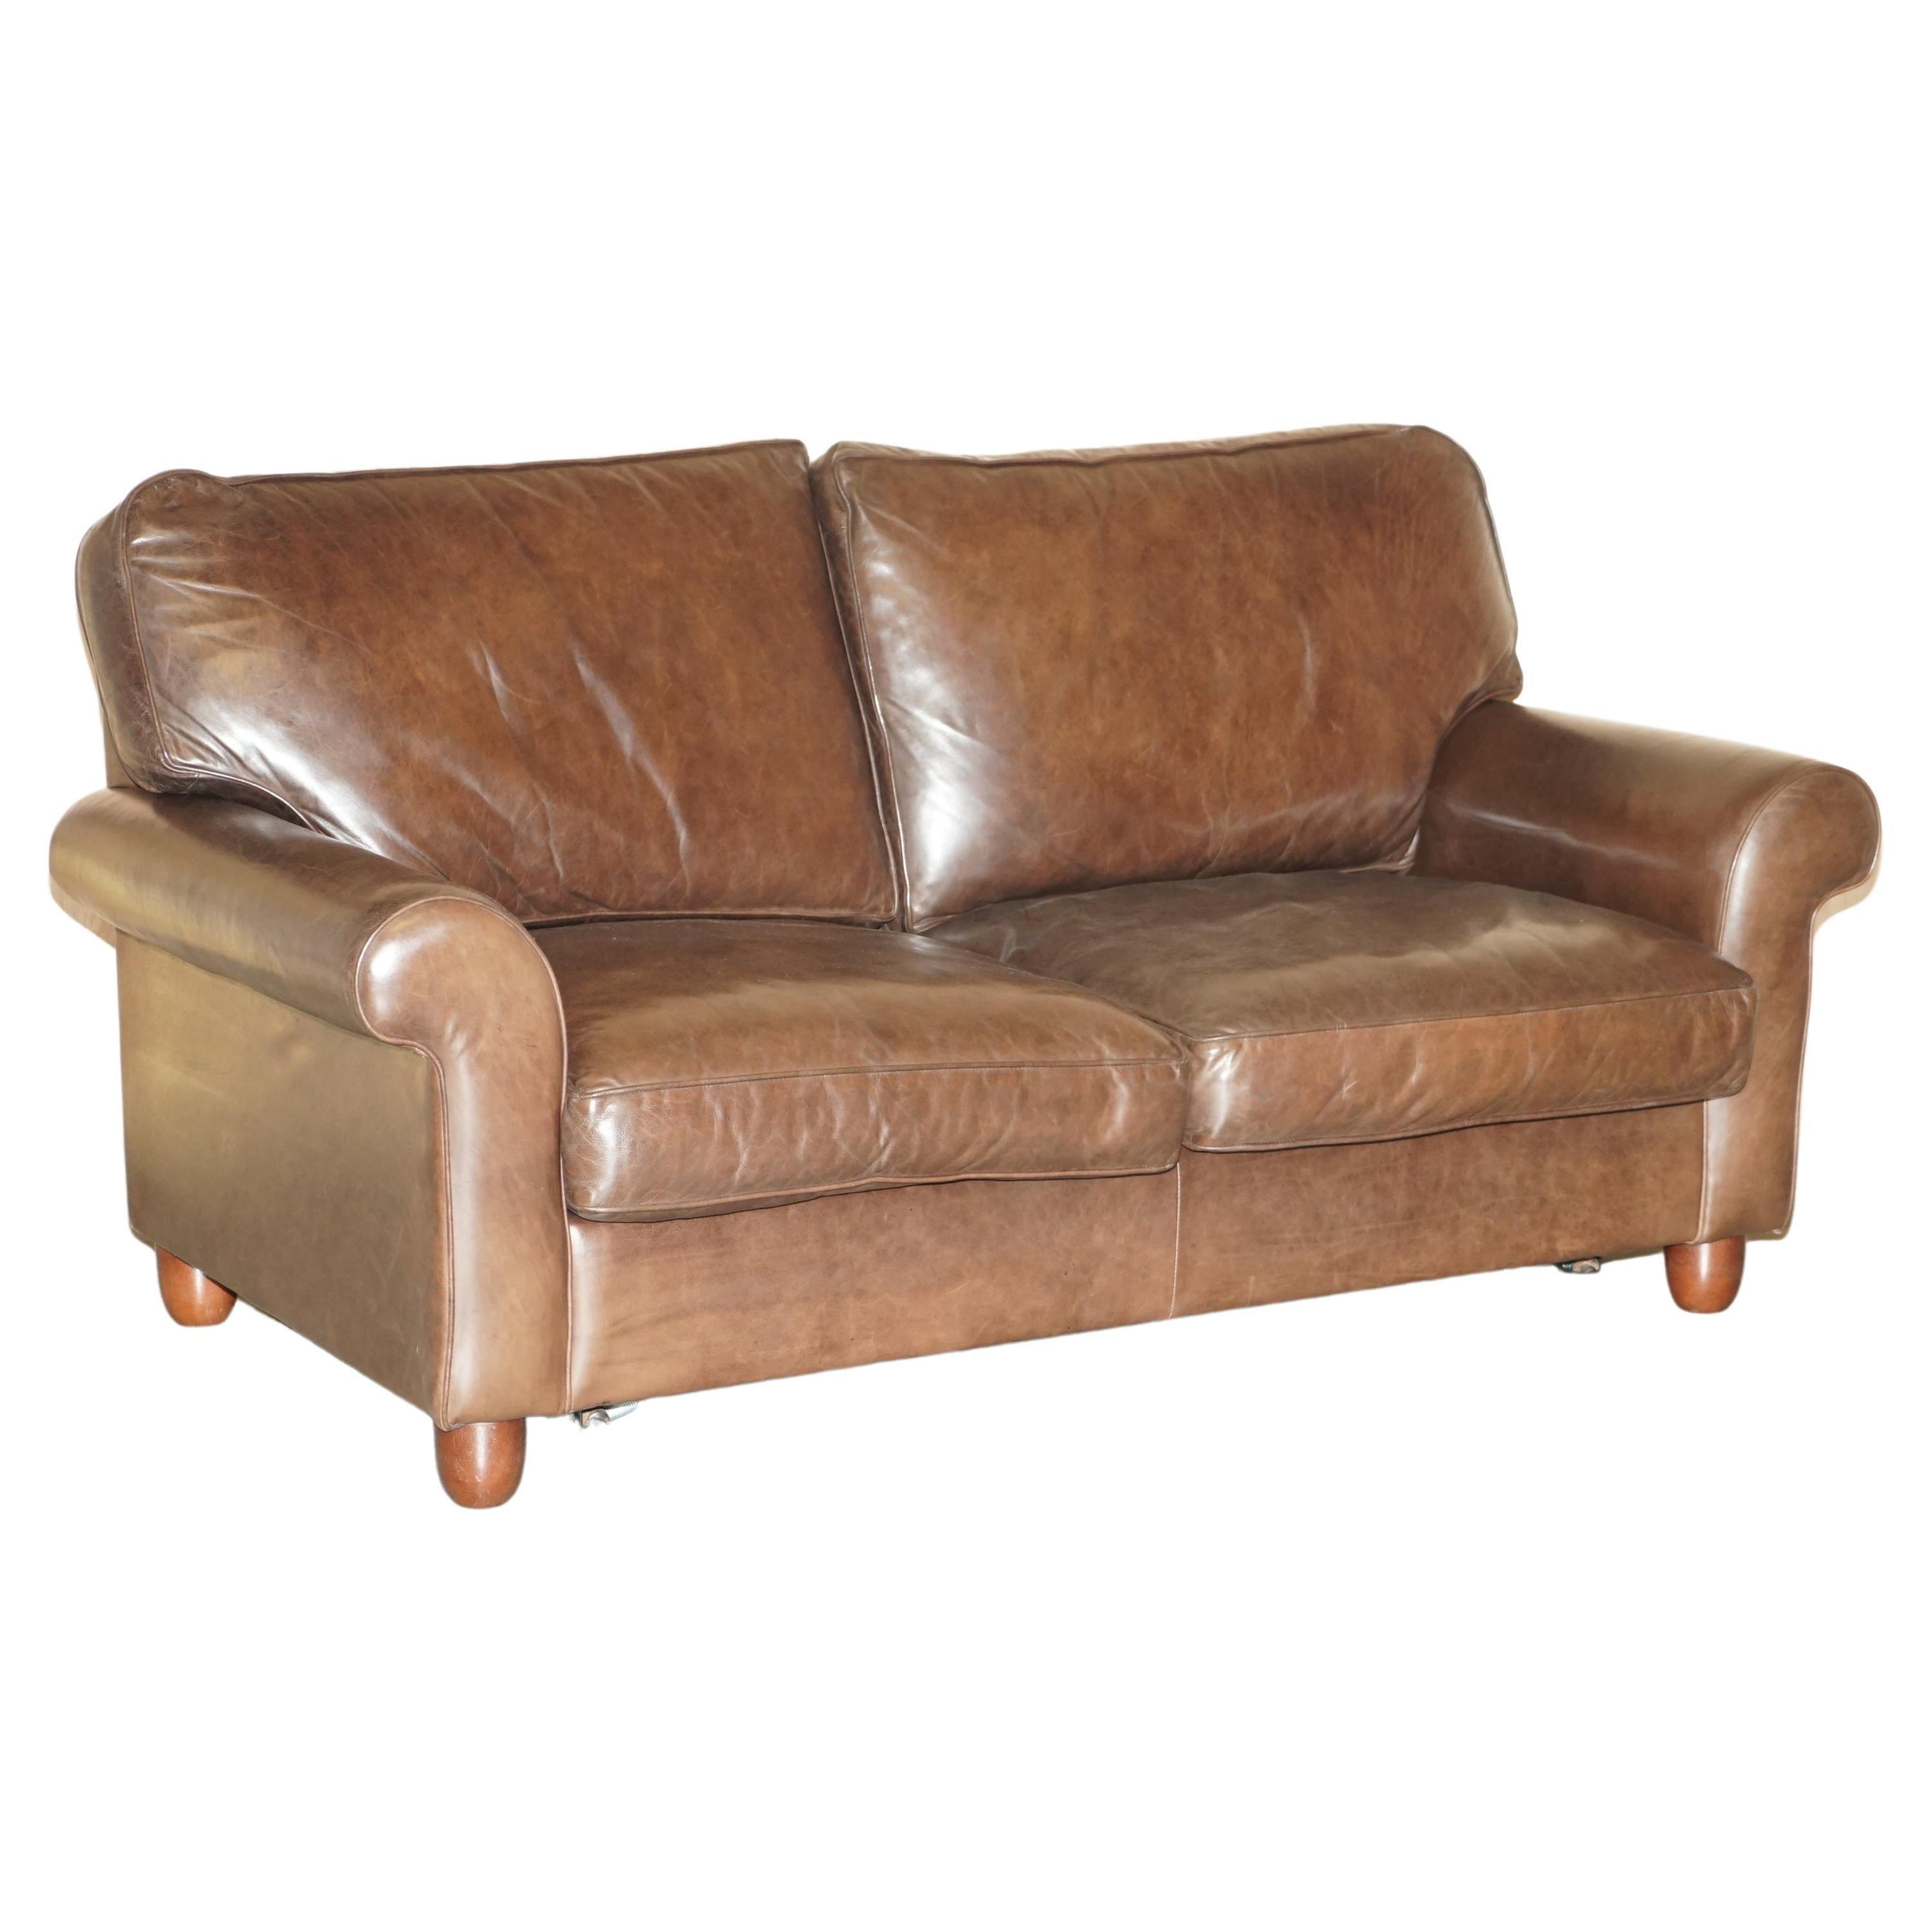 LOVELY HERITAGE BROWN LEATHER LAURA ASHLEY MORTIMER SOFABED IN SEHR GUTEM  ZUSTAND im Angebot bei 1stDibs